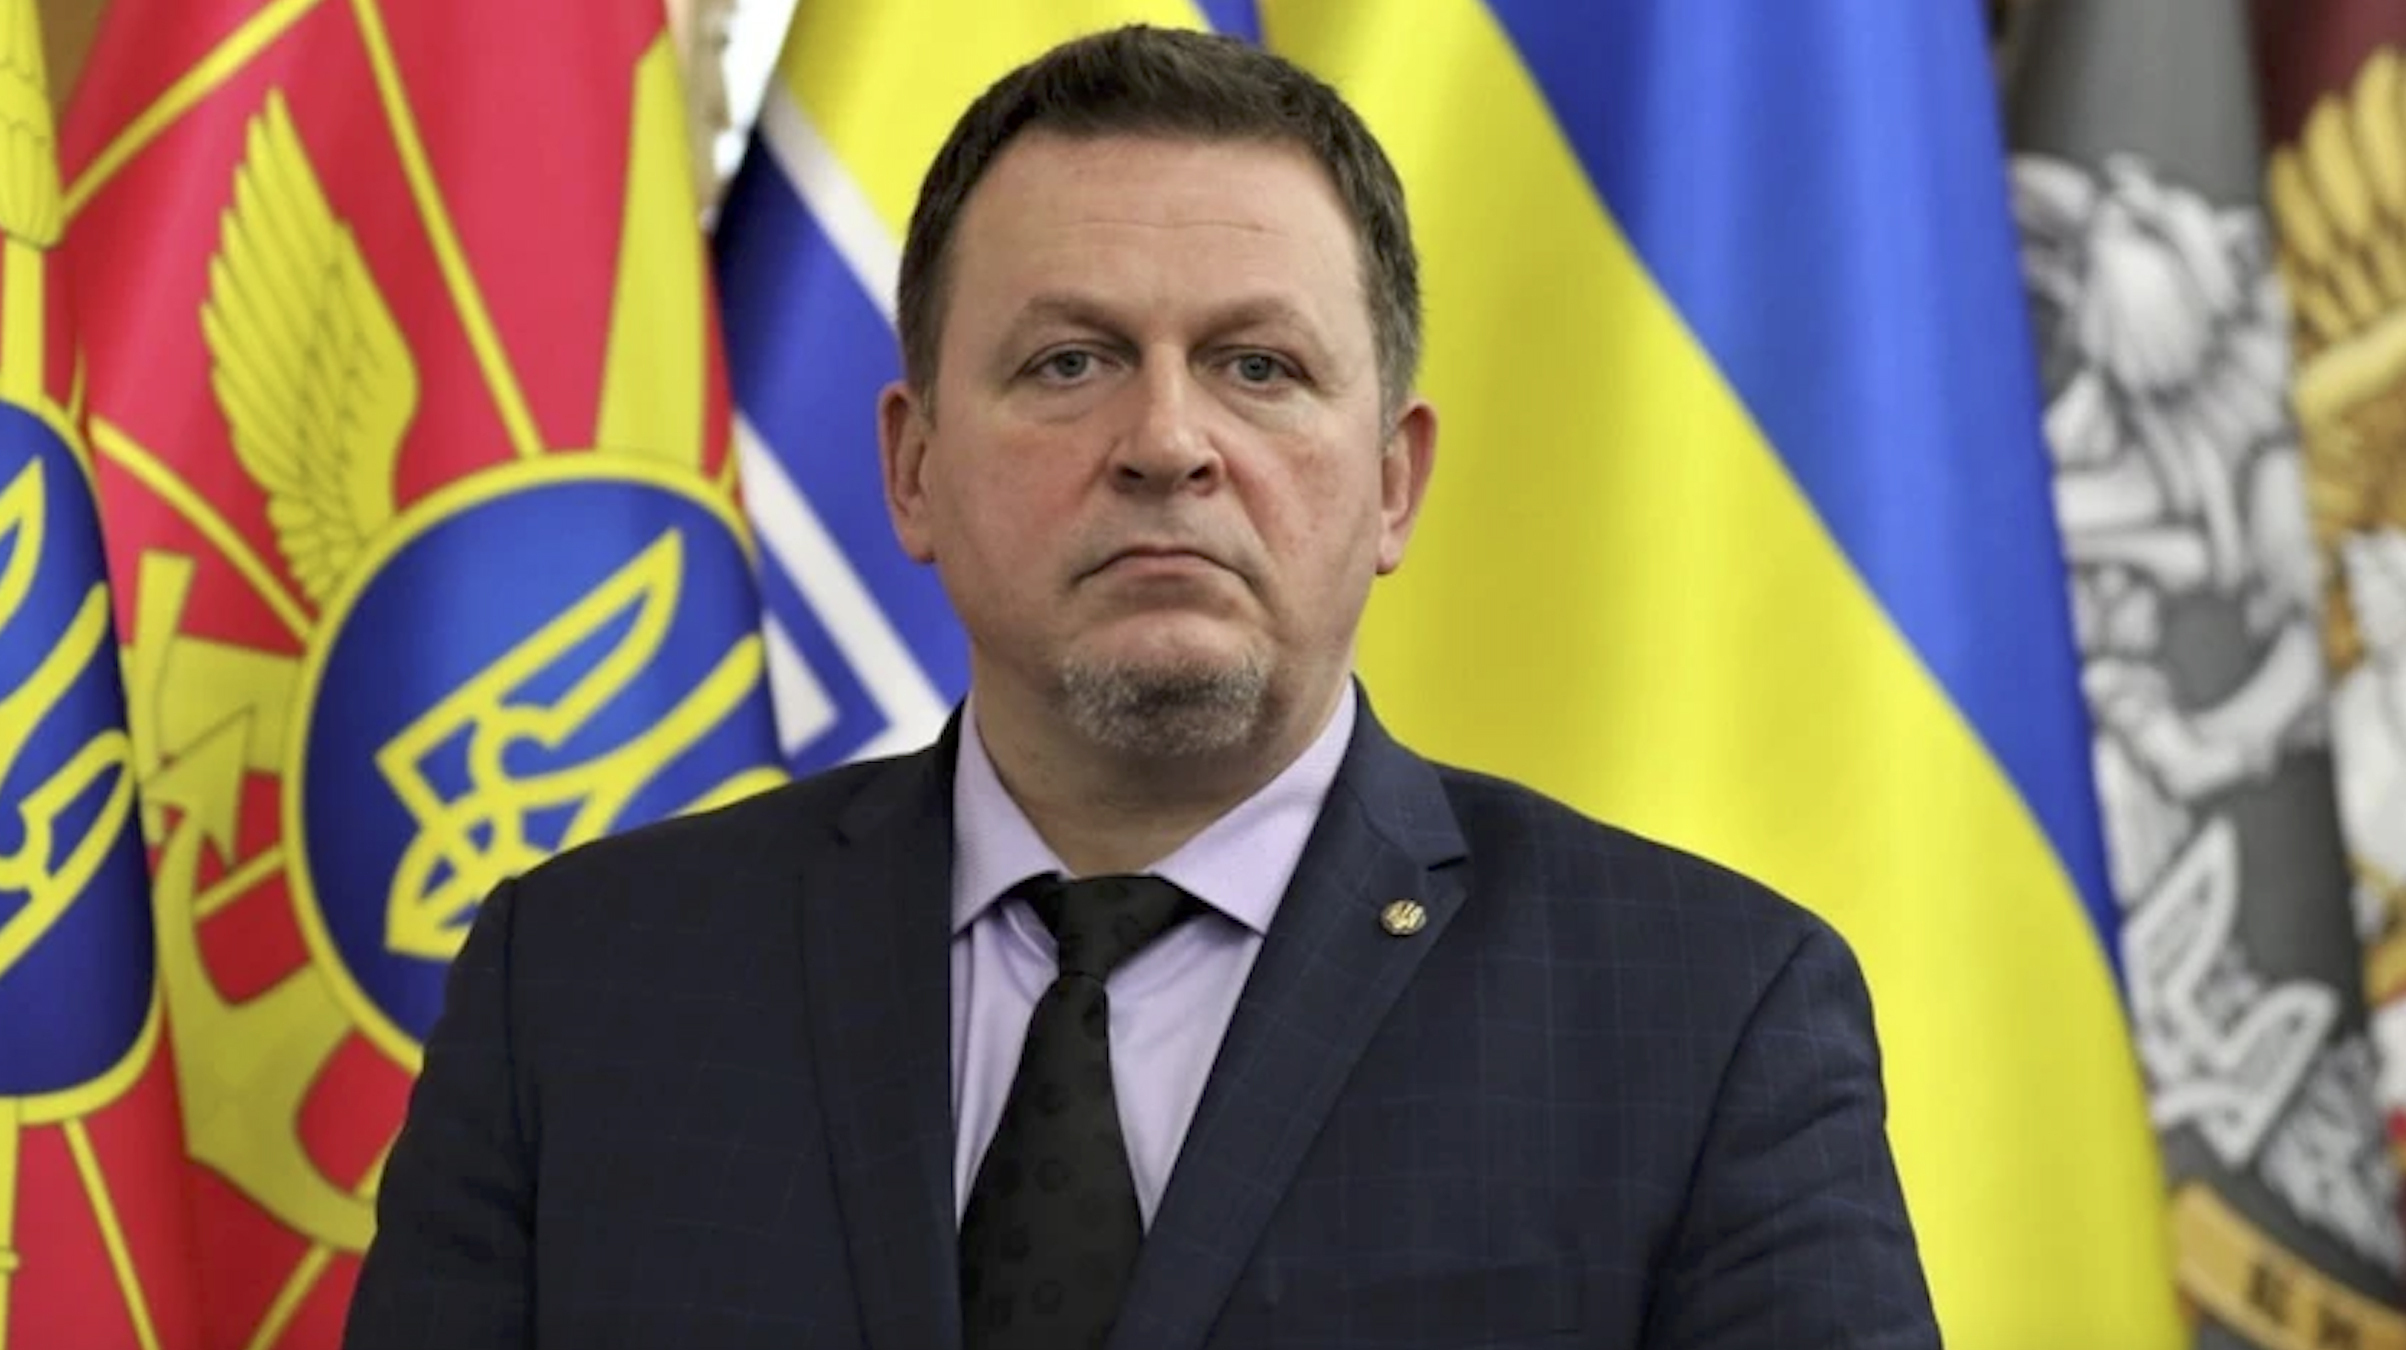 The Ukrainian authorities also confirmed the arrest and dismissal of the Deputy Minister of Infrastructure and Community Development, Vasil Lozinski.  (AP)